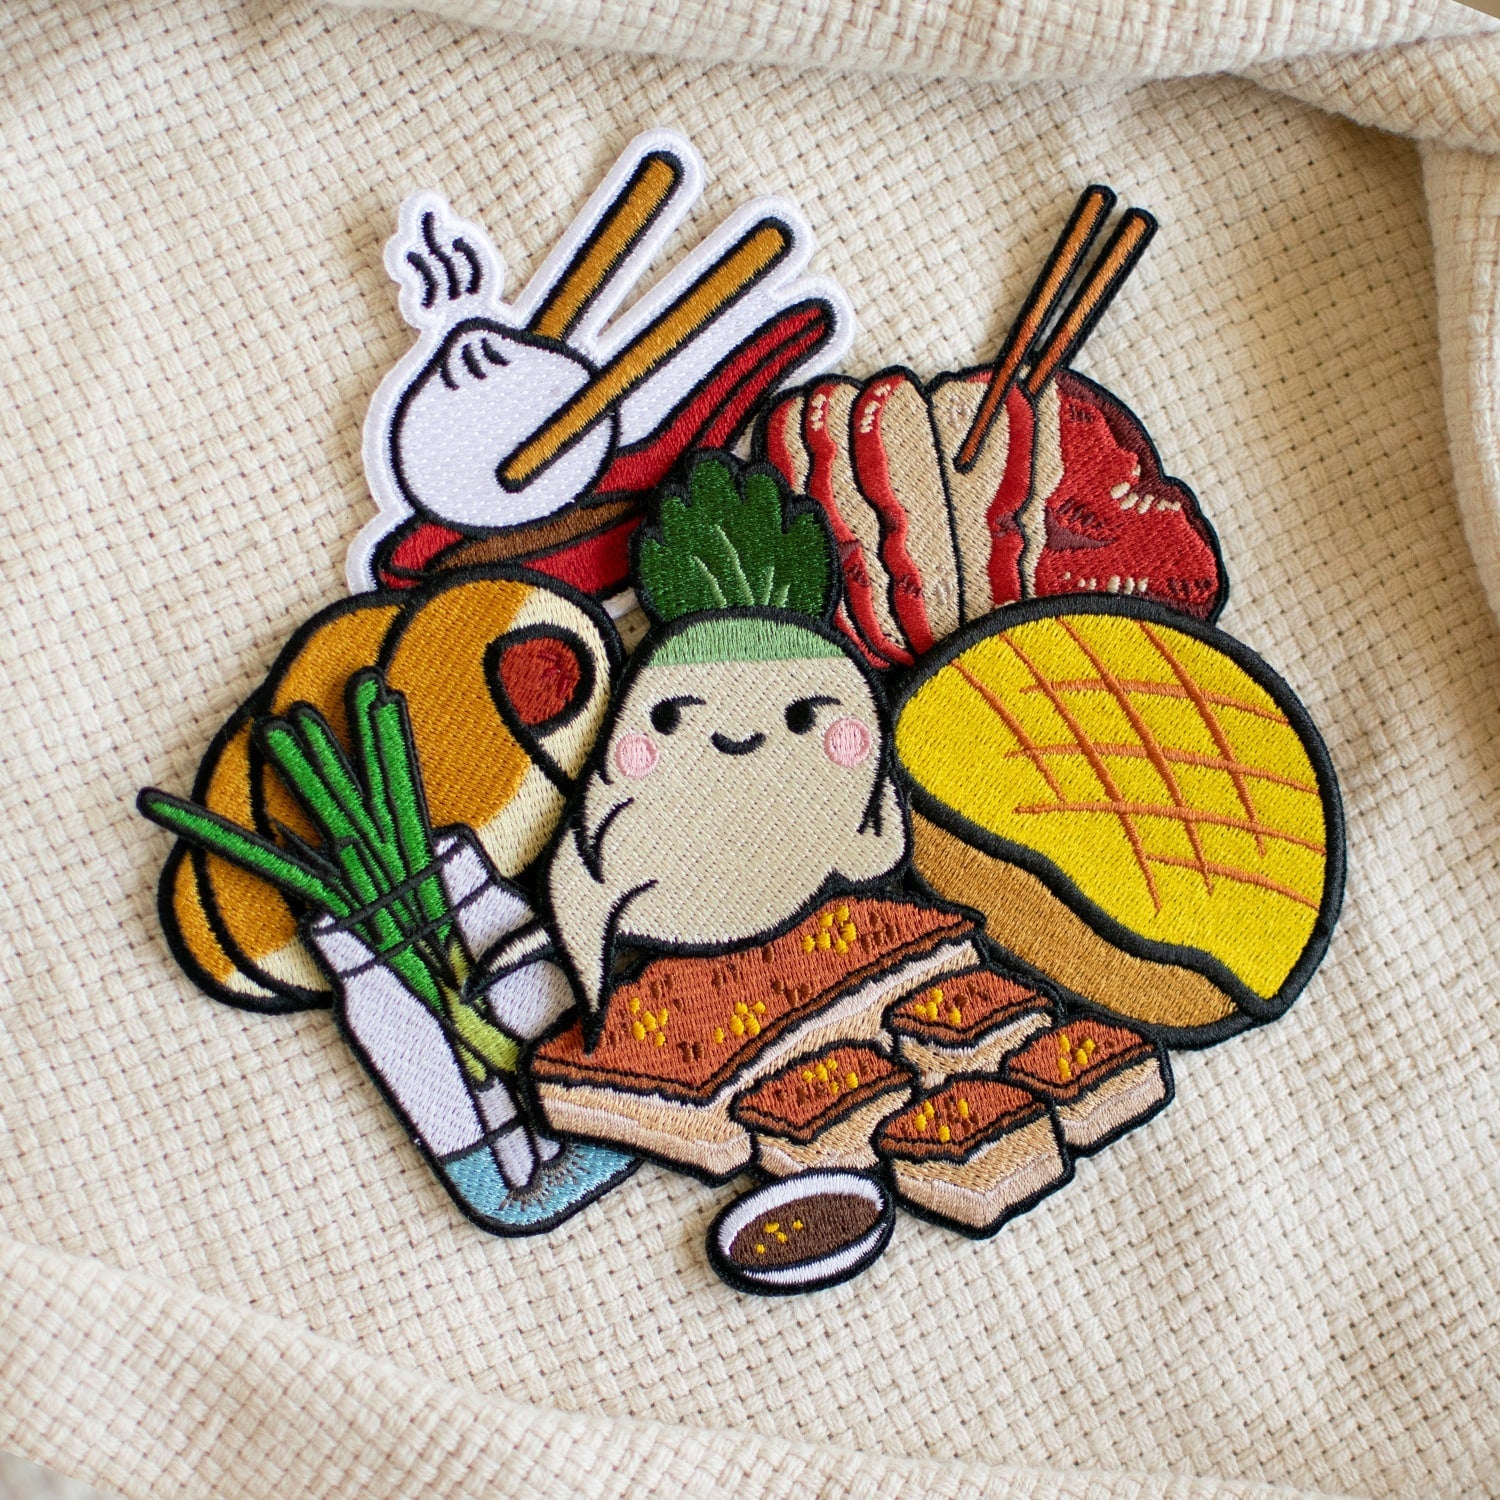 1 Random Embroidered Patch - Ni De Mama Chinese Clothing